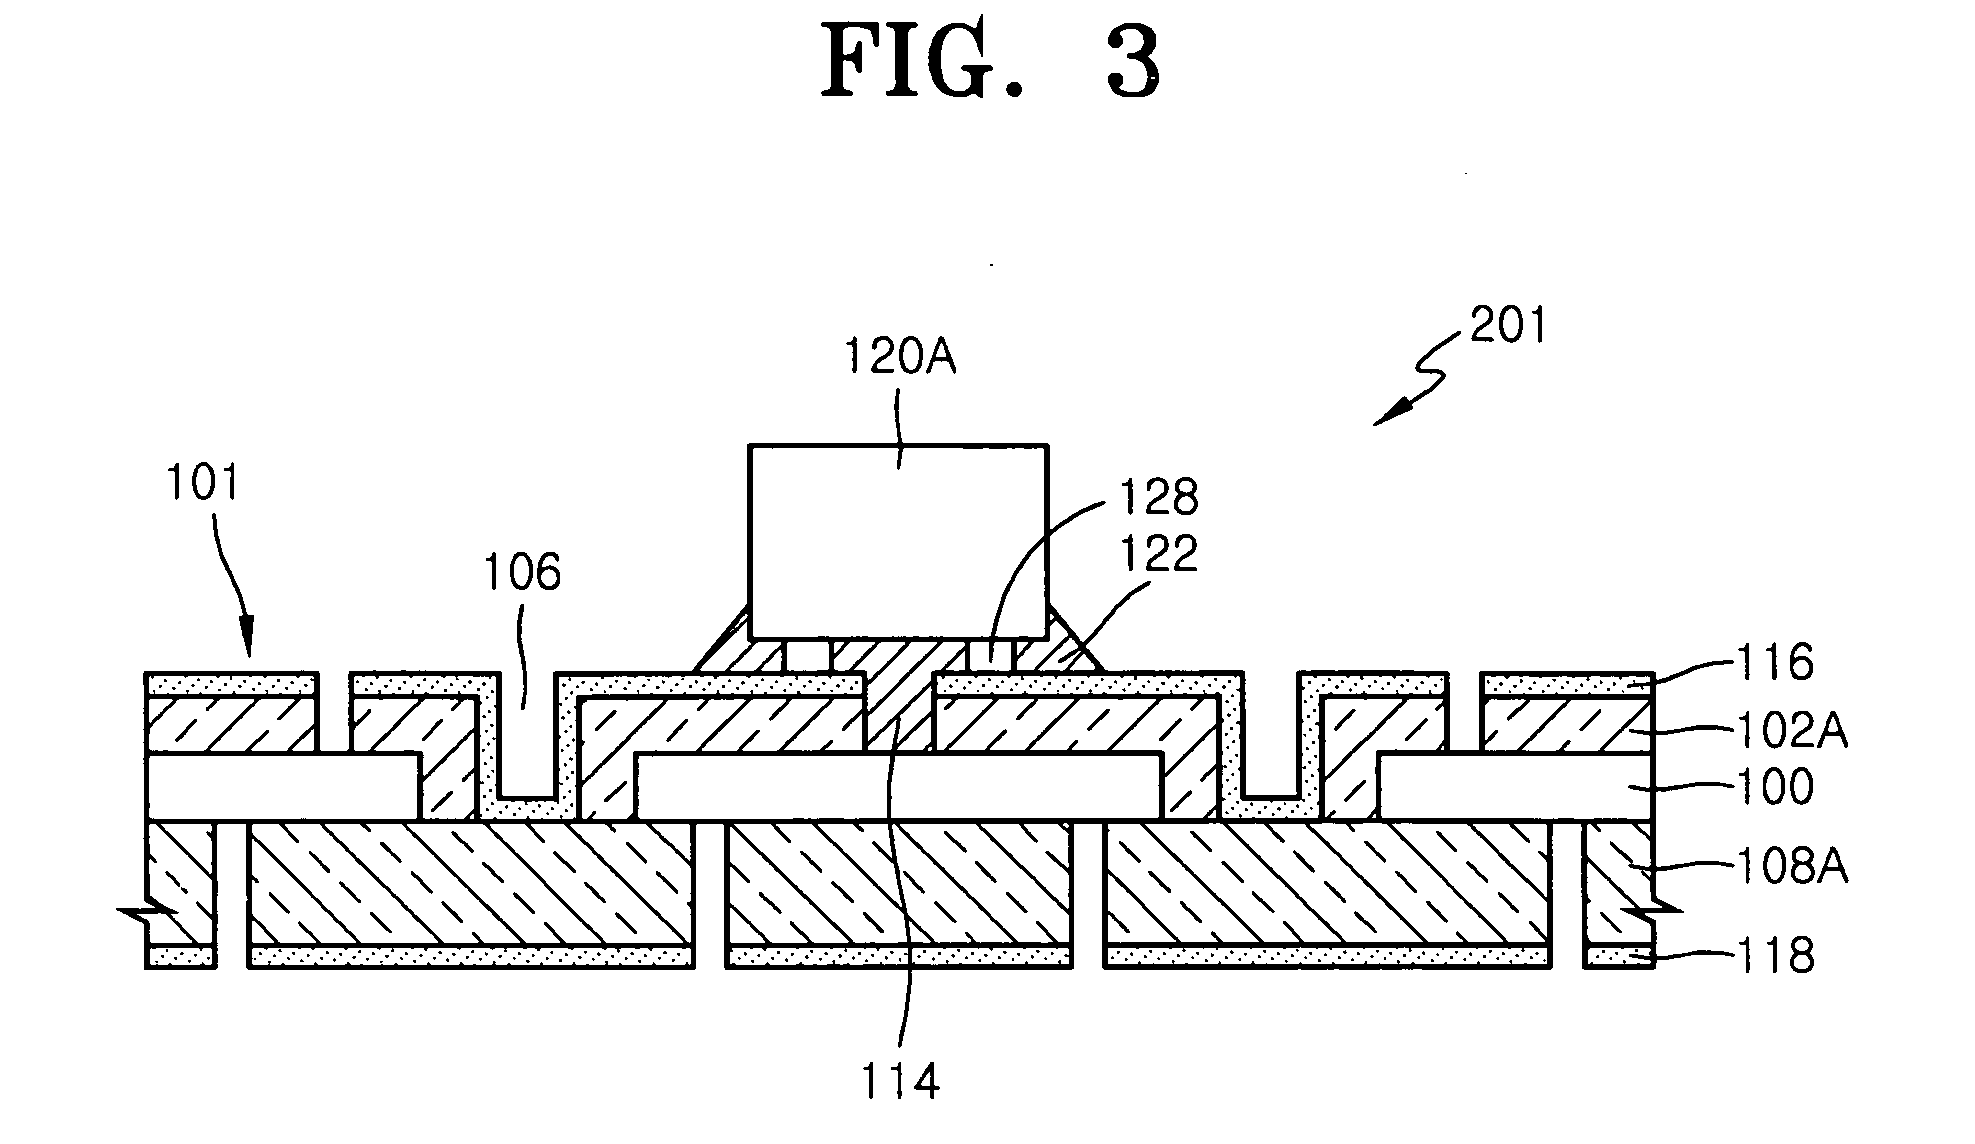 Substrate applicable to both wire bonding and flip chip bonding, smart card modules having the substrate and methods for fabricating the same